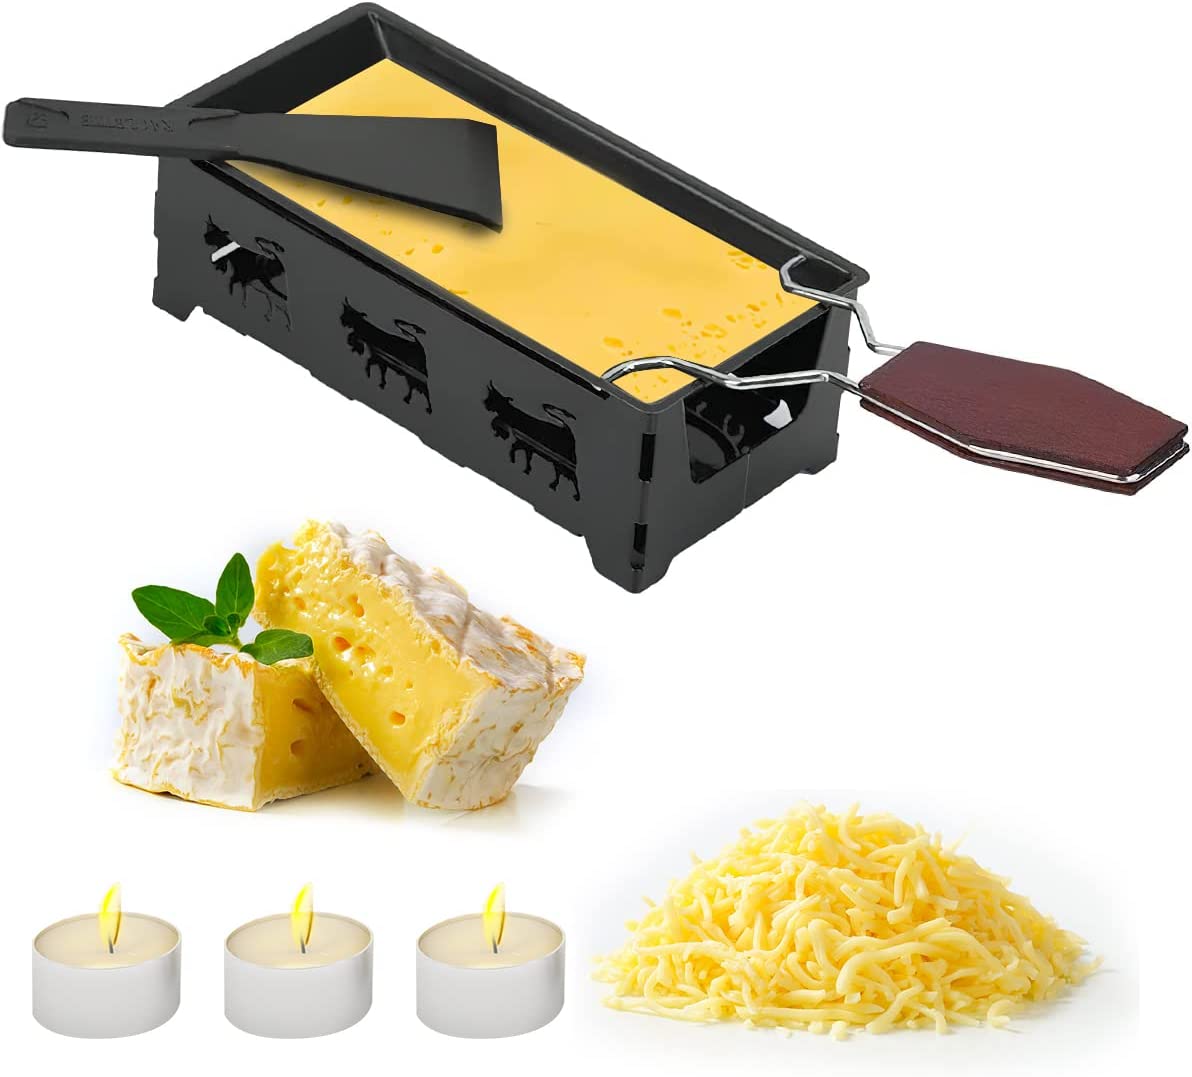 ACTOYS Non-Stick Cheese Raclette, Foldable Mini Raclette Set with Tea Light, Portable Raclette Grills, Cheese Raclette Set, Cheese Grill, Cheese Melting Pan for Melted Chocolate Cheese, with Silicone Spatula